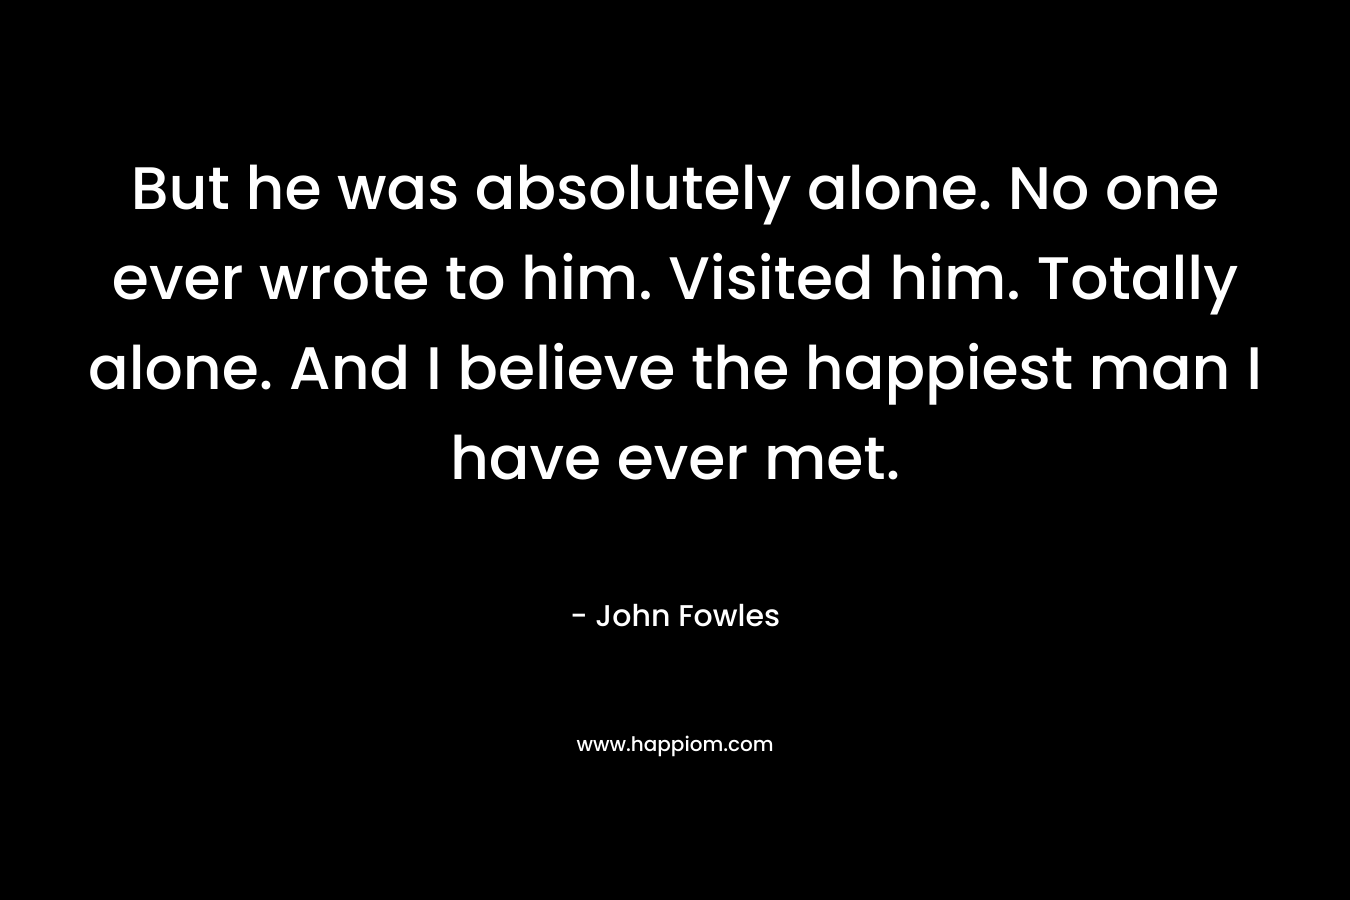 But he was absolutely alone. No one ever wrote to him. Visited him. Totally alone. And I believe the happiest man I have ever met.